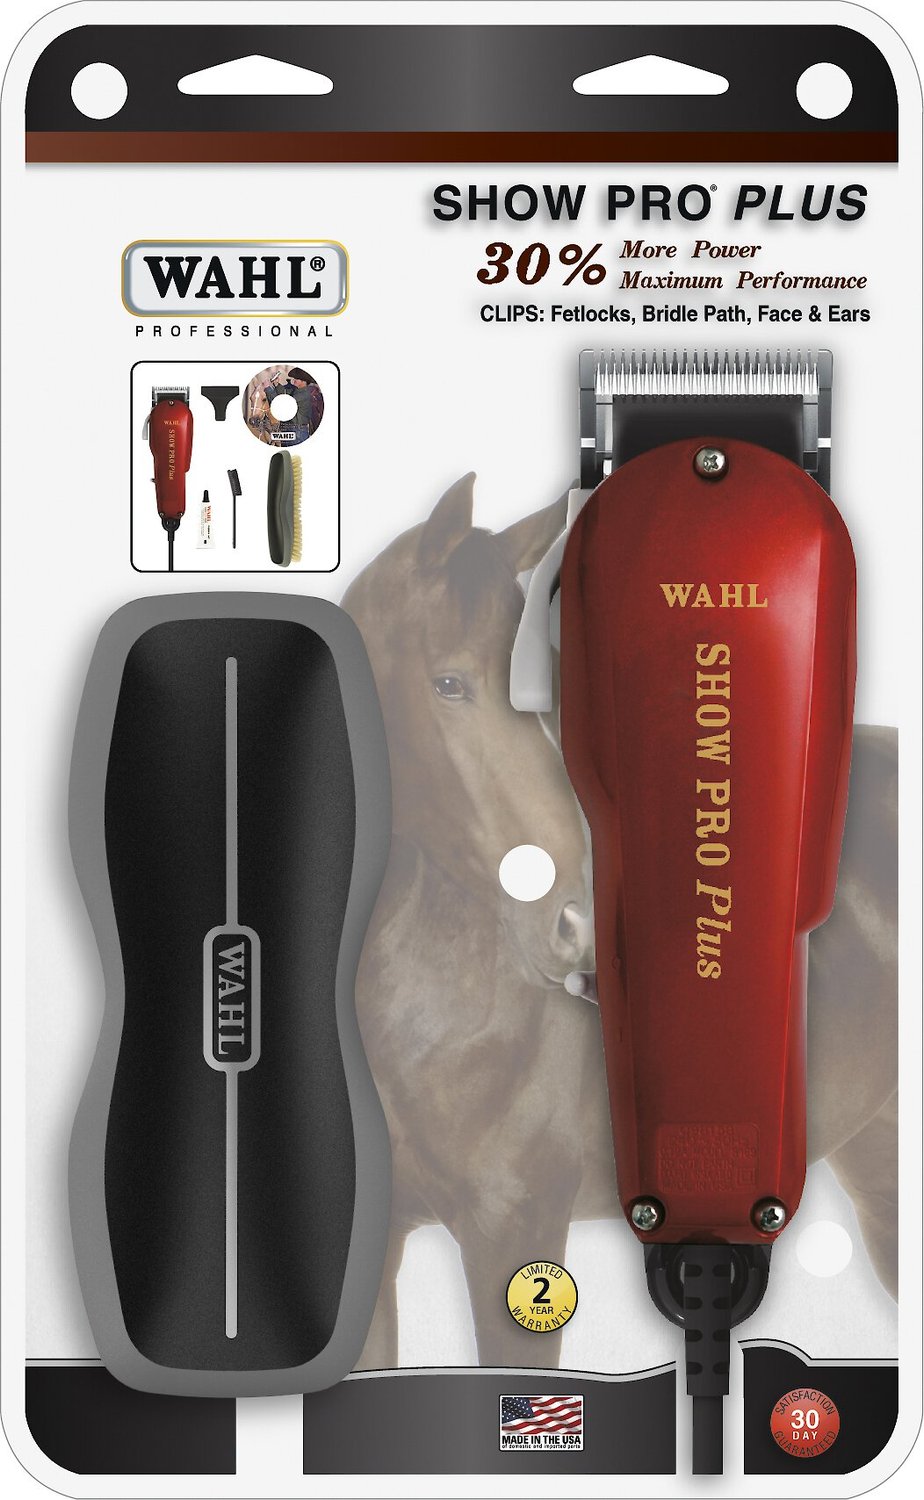 wahl show pro plus clippers